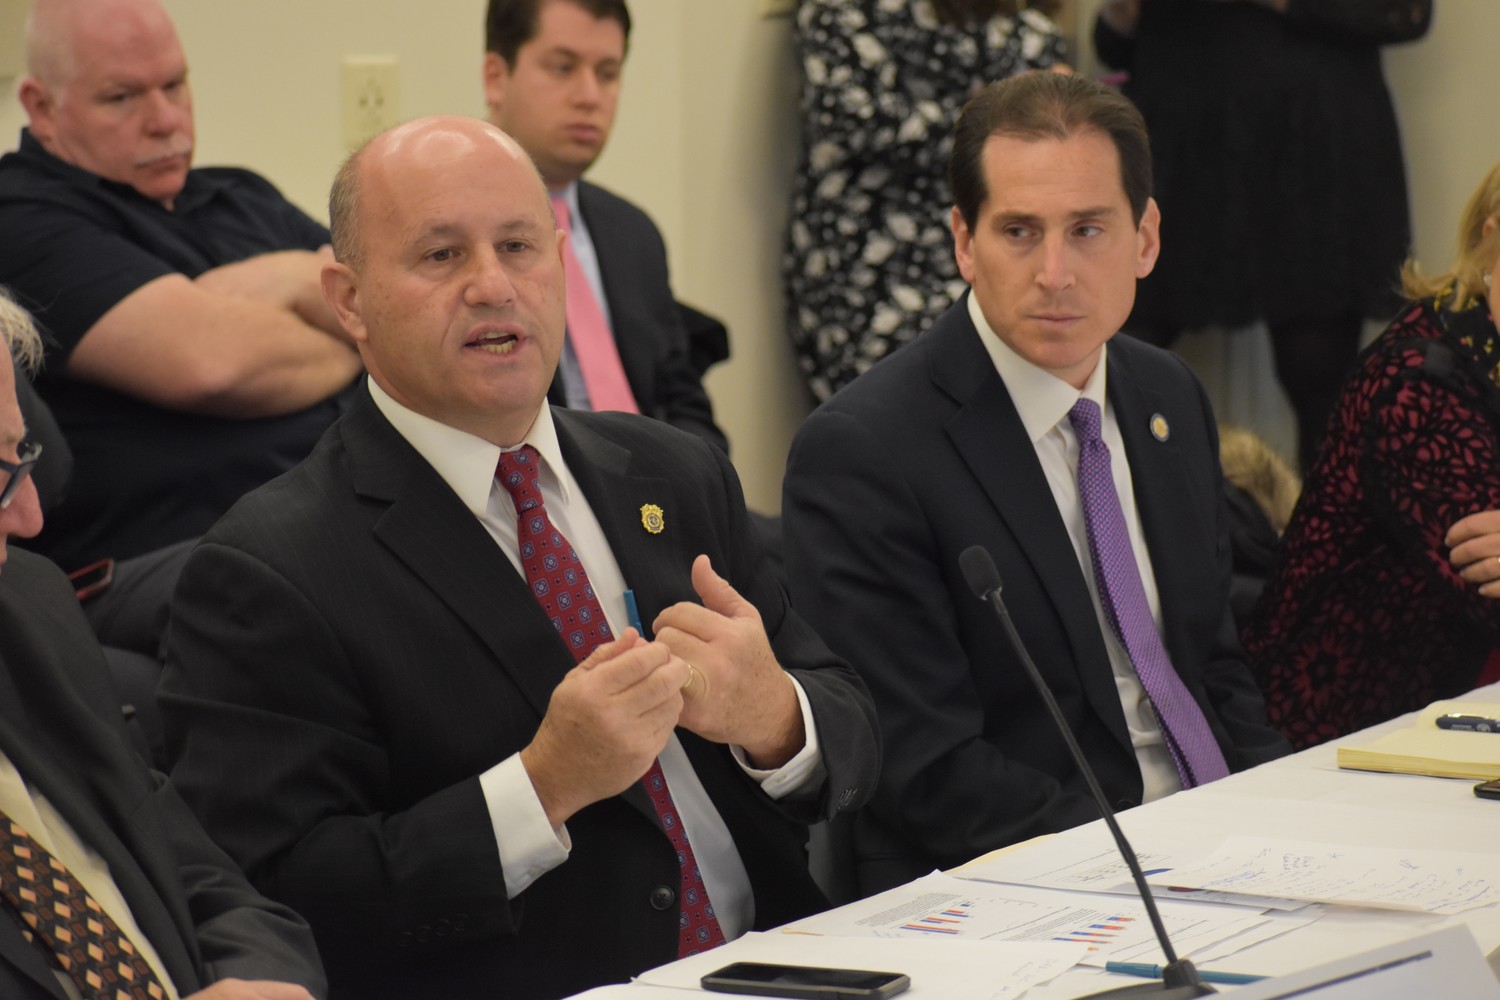 Nassau County Police Commissioner Patrick Ryder, left, aired concerns about legalizing marijuana during a  roundtable about road safety at Molloy College on Jan. 7. State Sen. Todd Kaminsky, right, hosted the meeting.